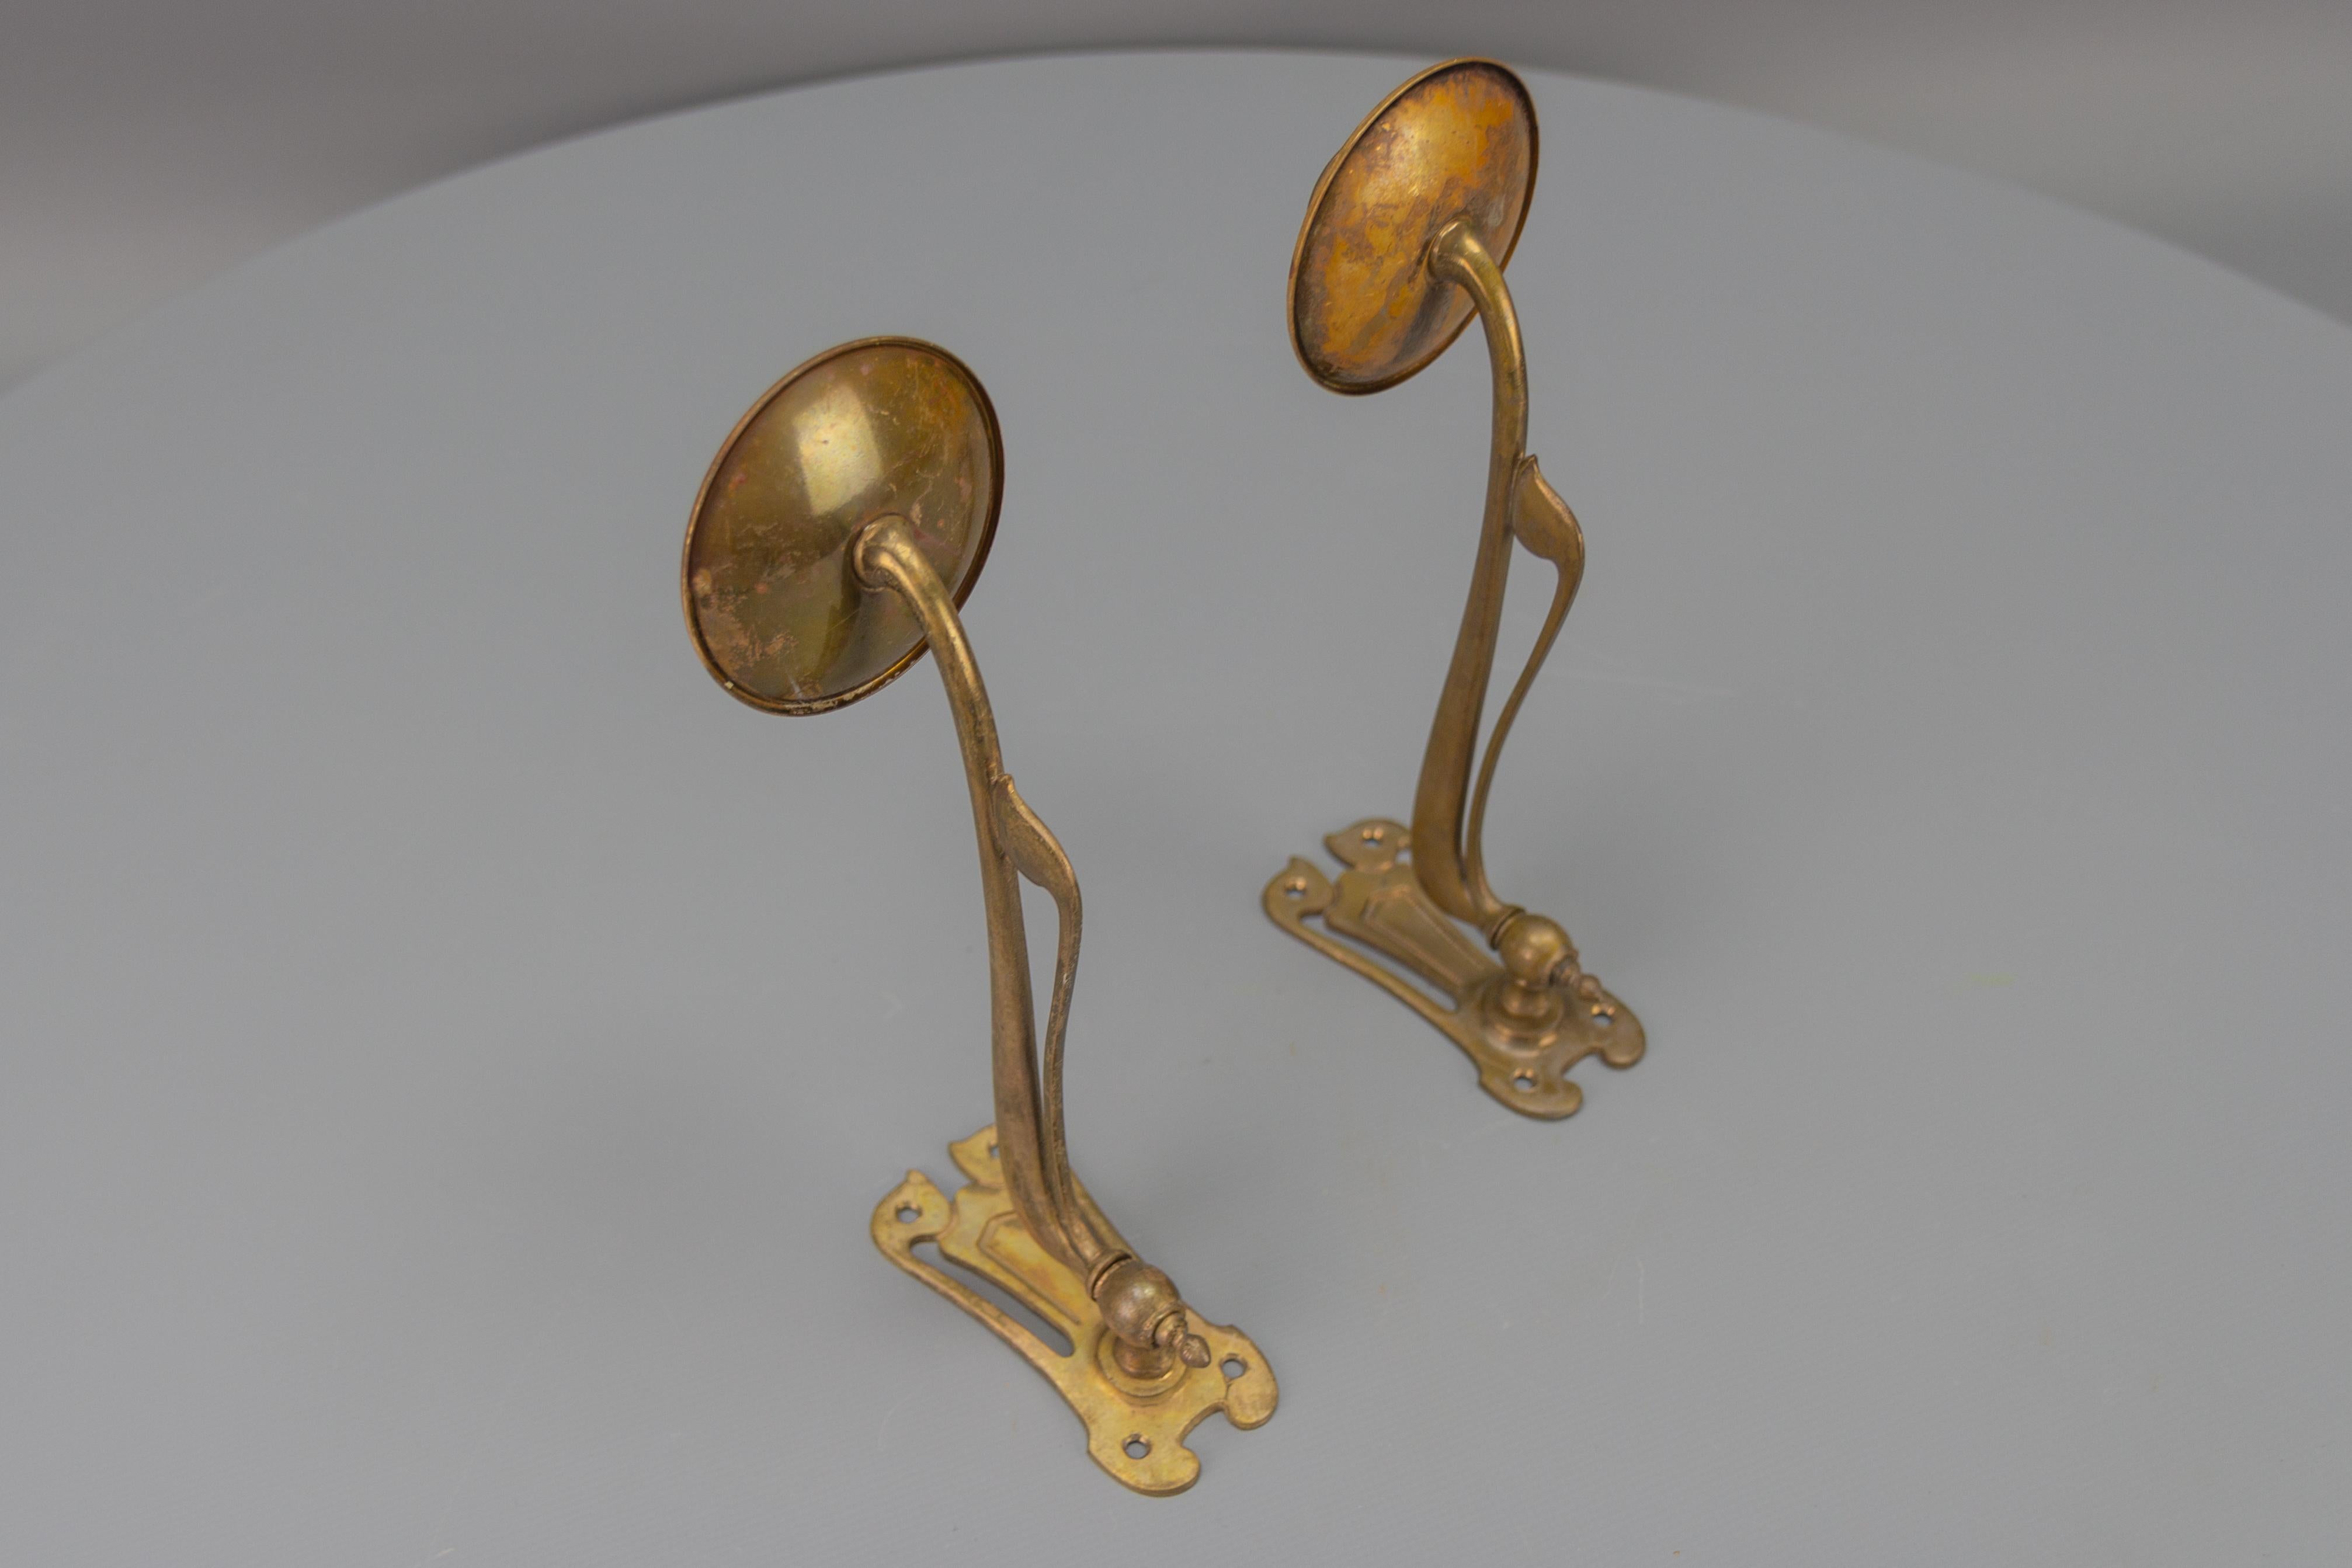 Pair of French Art Nouveau Brass Piano Wall Sconces Swivel Candle Holders, 1920 1